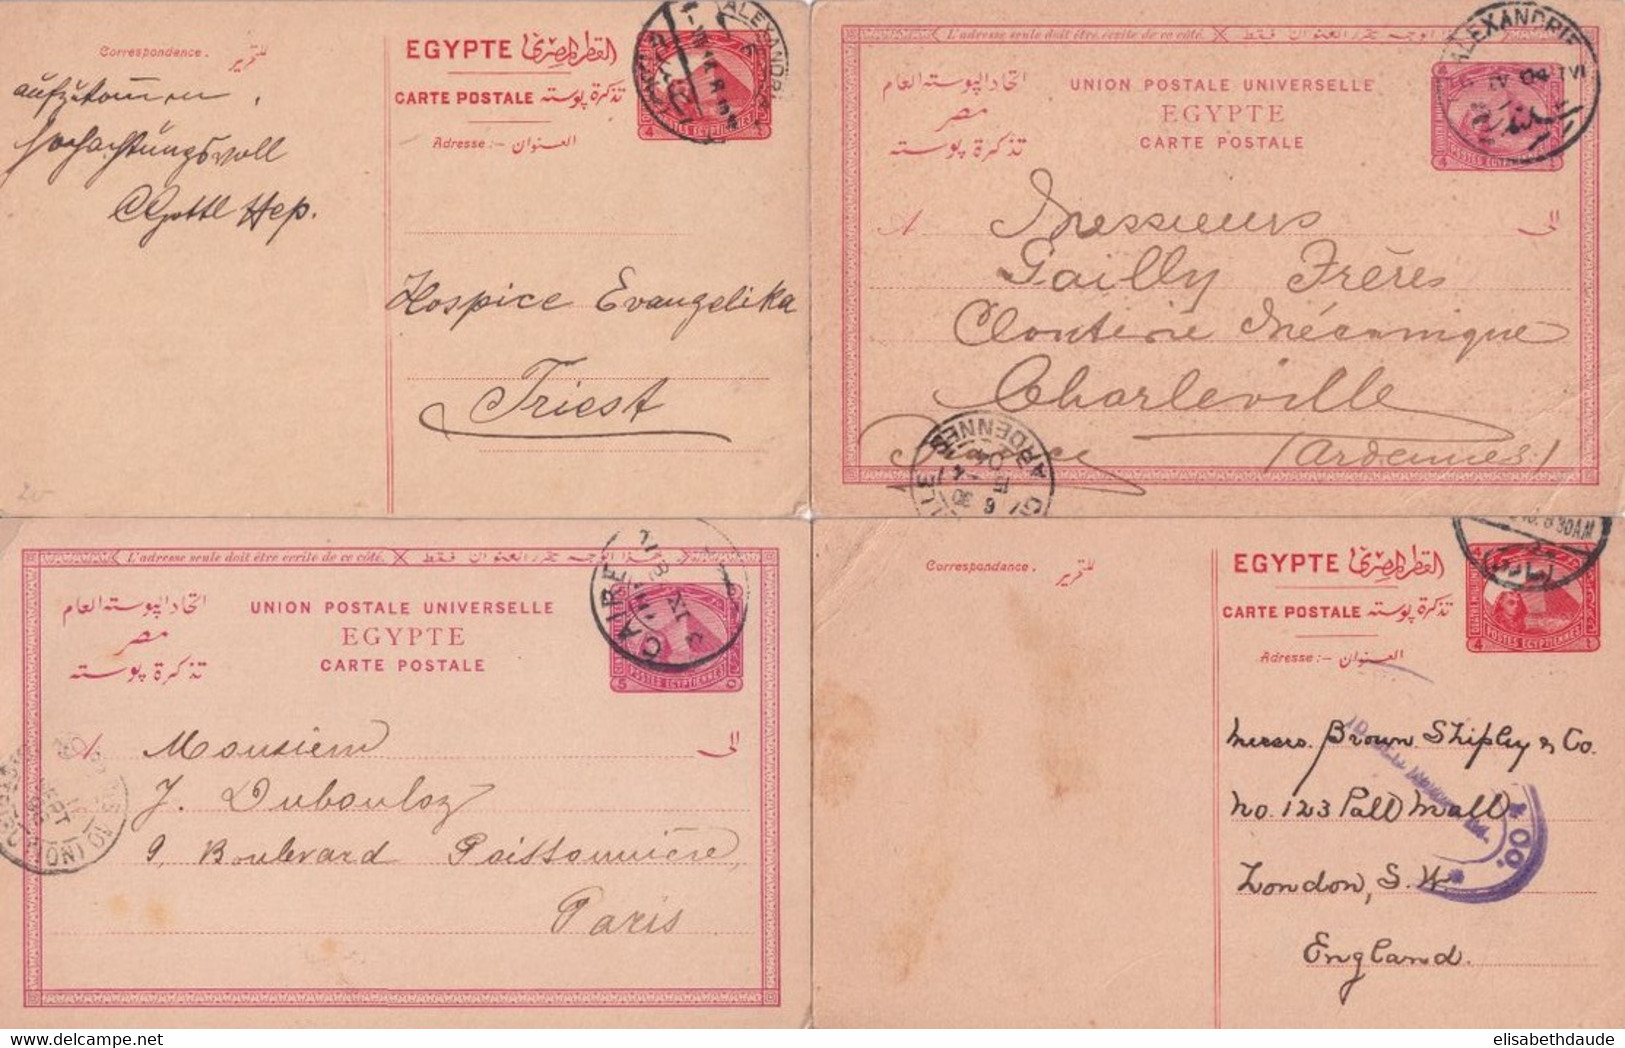 EGYPTE - 1898/1914 ENTIERS POSTAUX - 4 CARTES  TYPE PYRAMIDE / SPHINX => FRANCE / TRIESTE / ANGLETERRE !  DESTINATIONS ! - 1866-1914 Khedivate Of Egypt